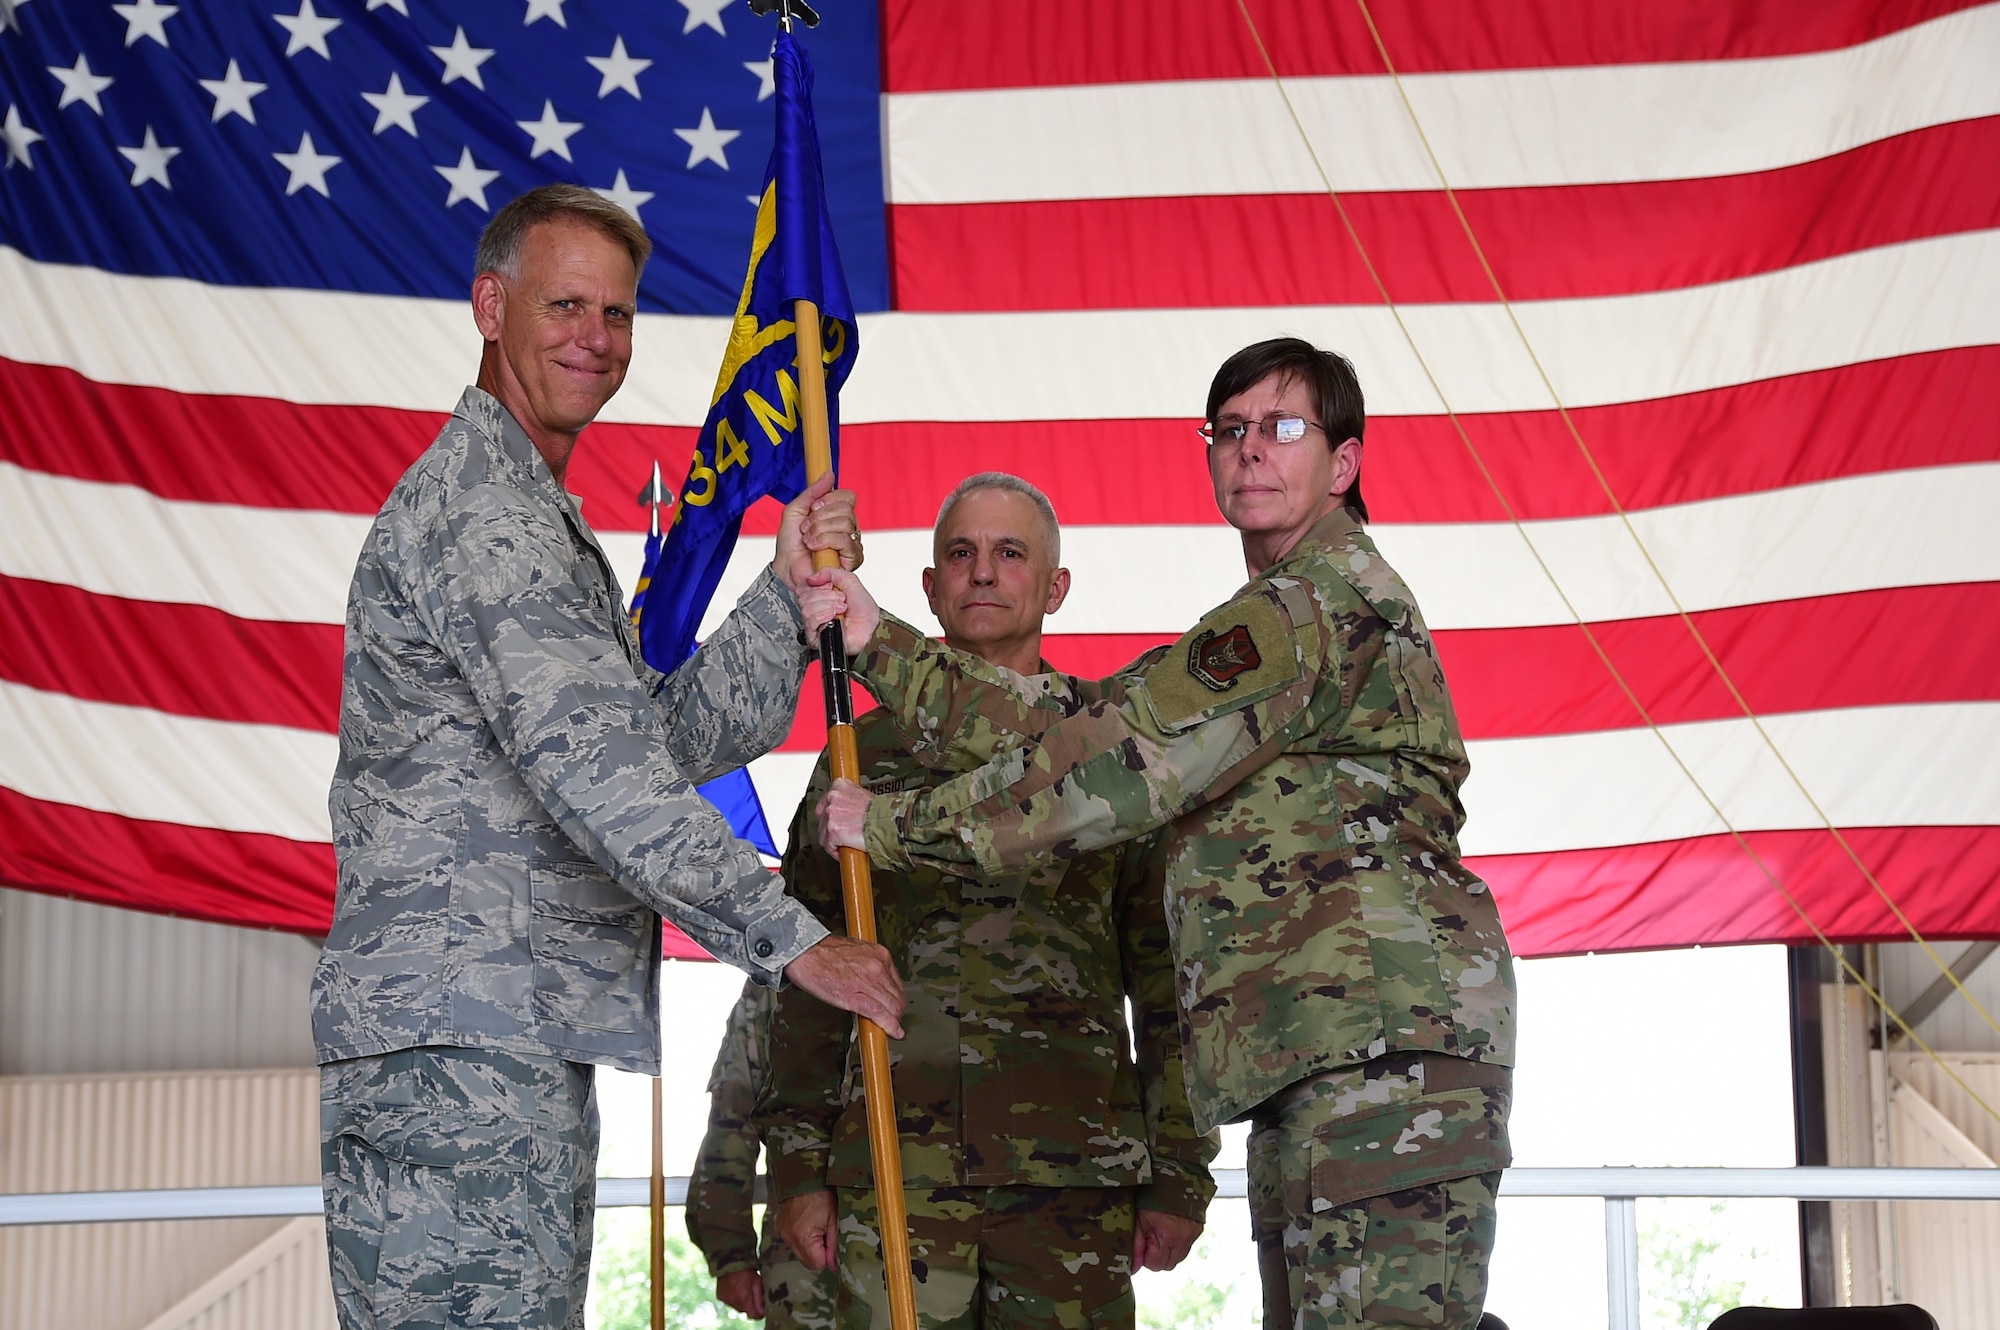 Col. Gretchen Wiltse, 434th Mission Support Group commander, receives the guidon from Col. Larry Shaw, 434th Air Refueling Wing commander, during a change of command ceremony at Grissom Air Reserve Base, Indiana July. 9, 2020. Wiltse joins MSG from Grissom’s maintenance group, where she also served as the group commander. 
(U.S. Air Force photo/SSgt. Chris Massey)